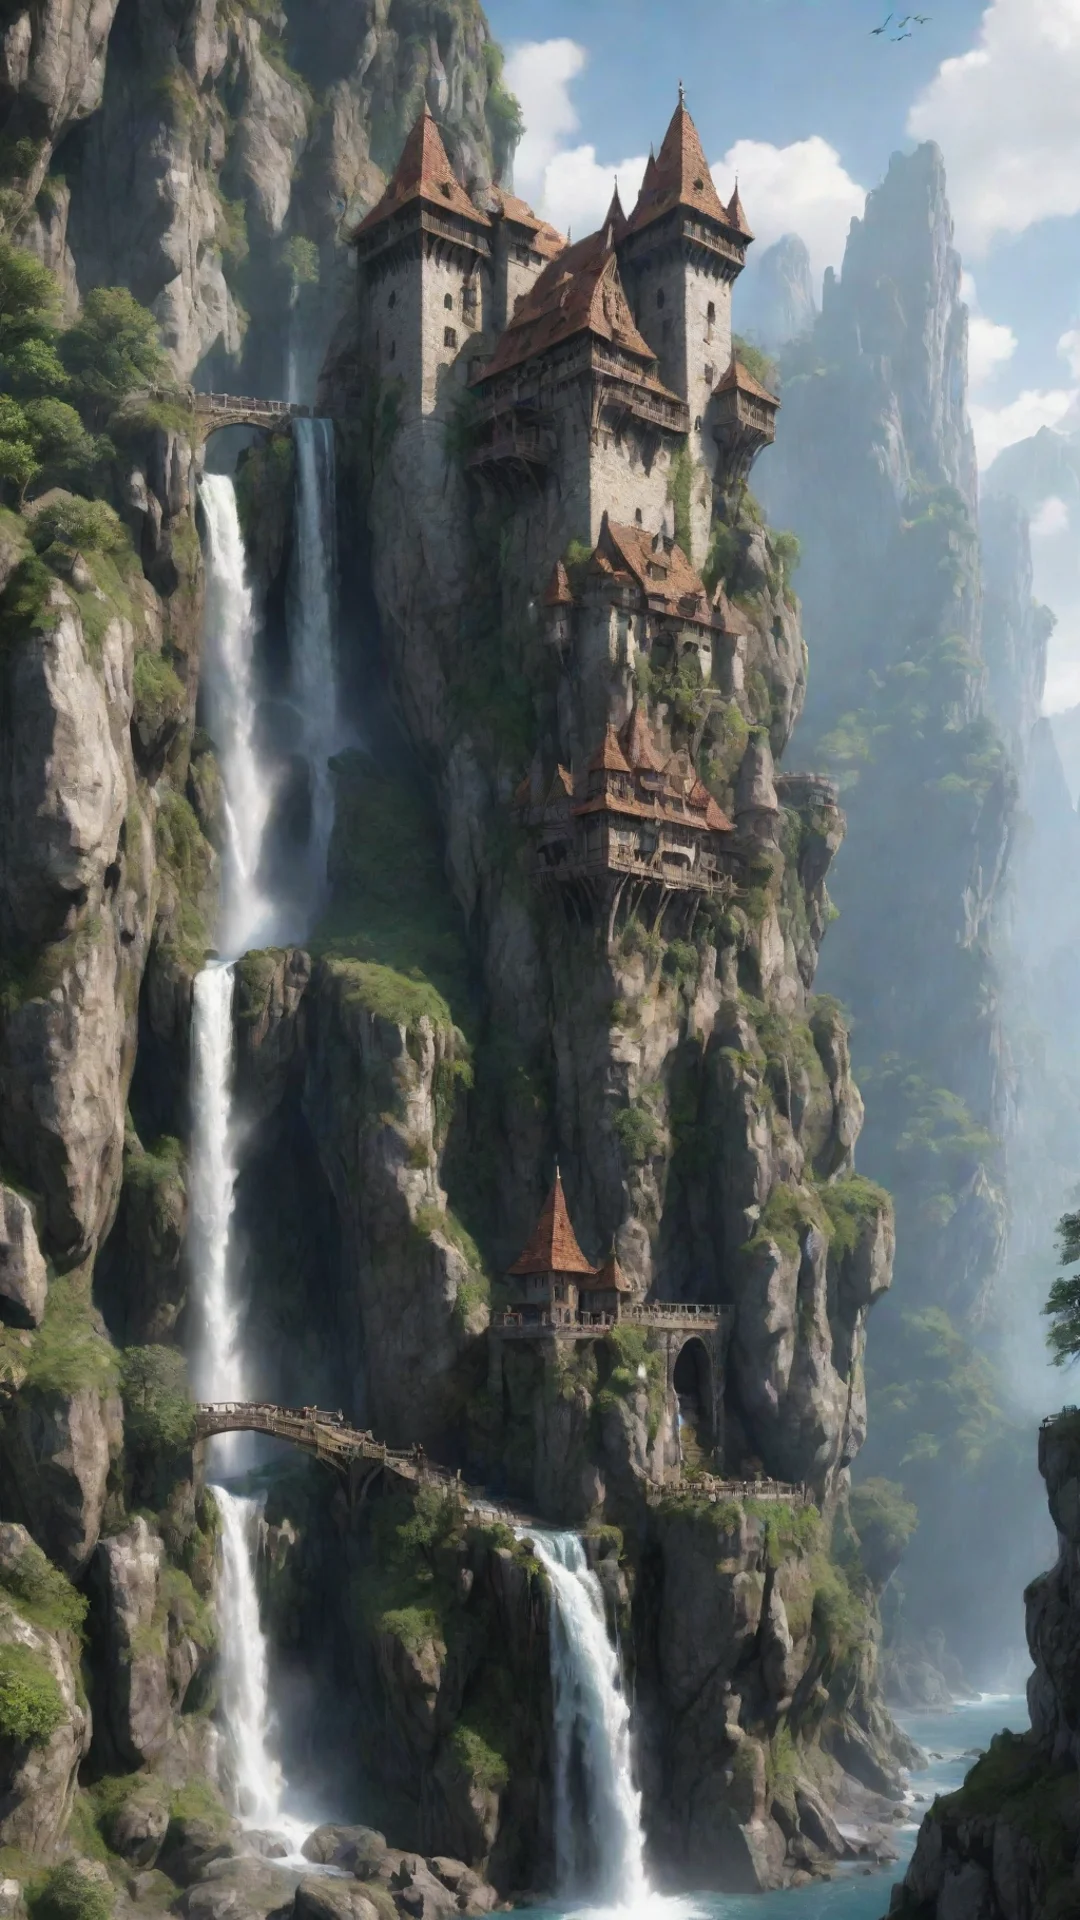 aiamazing elfish castle on extreme cliff overhangs caves hd detailed realistic asthetic lovely waterfalls awesome portrait 2 tall